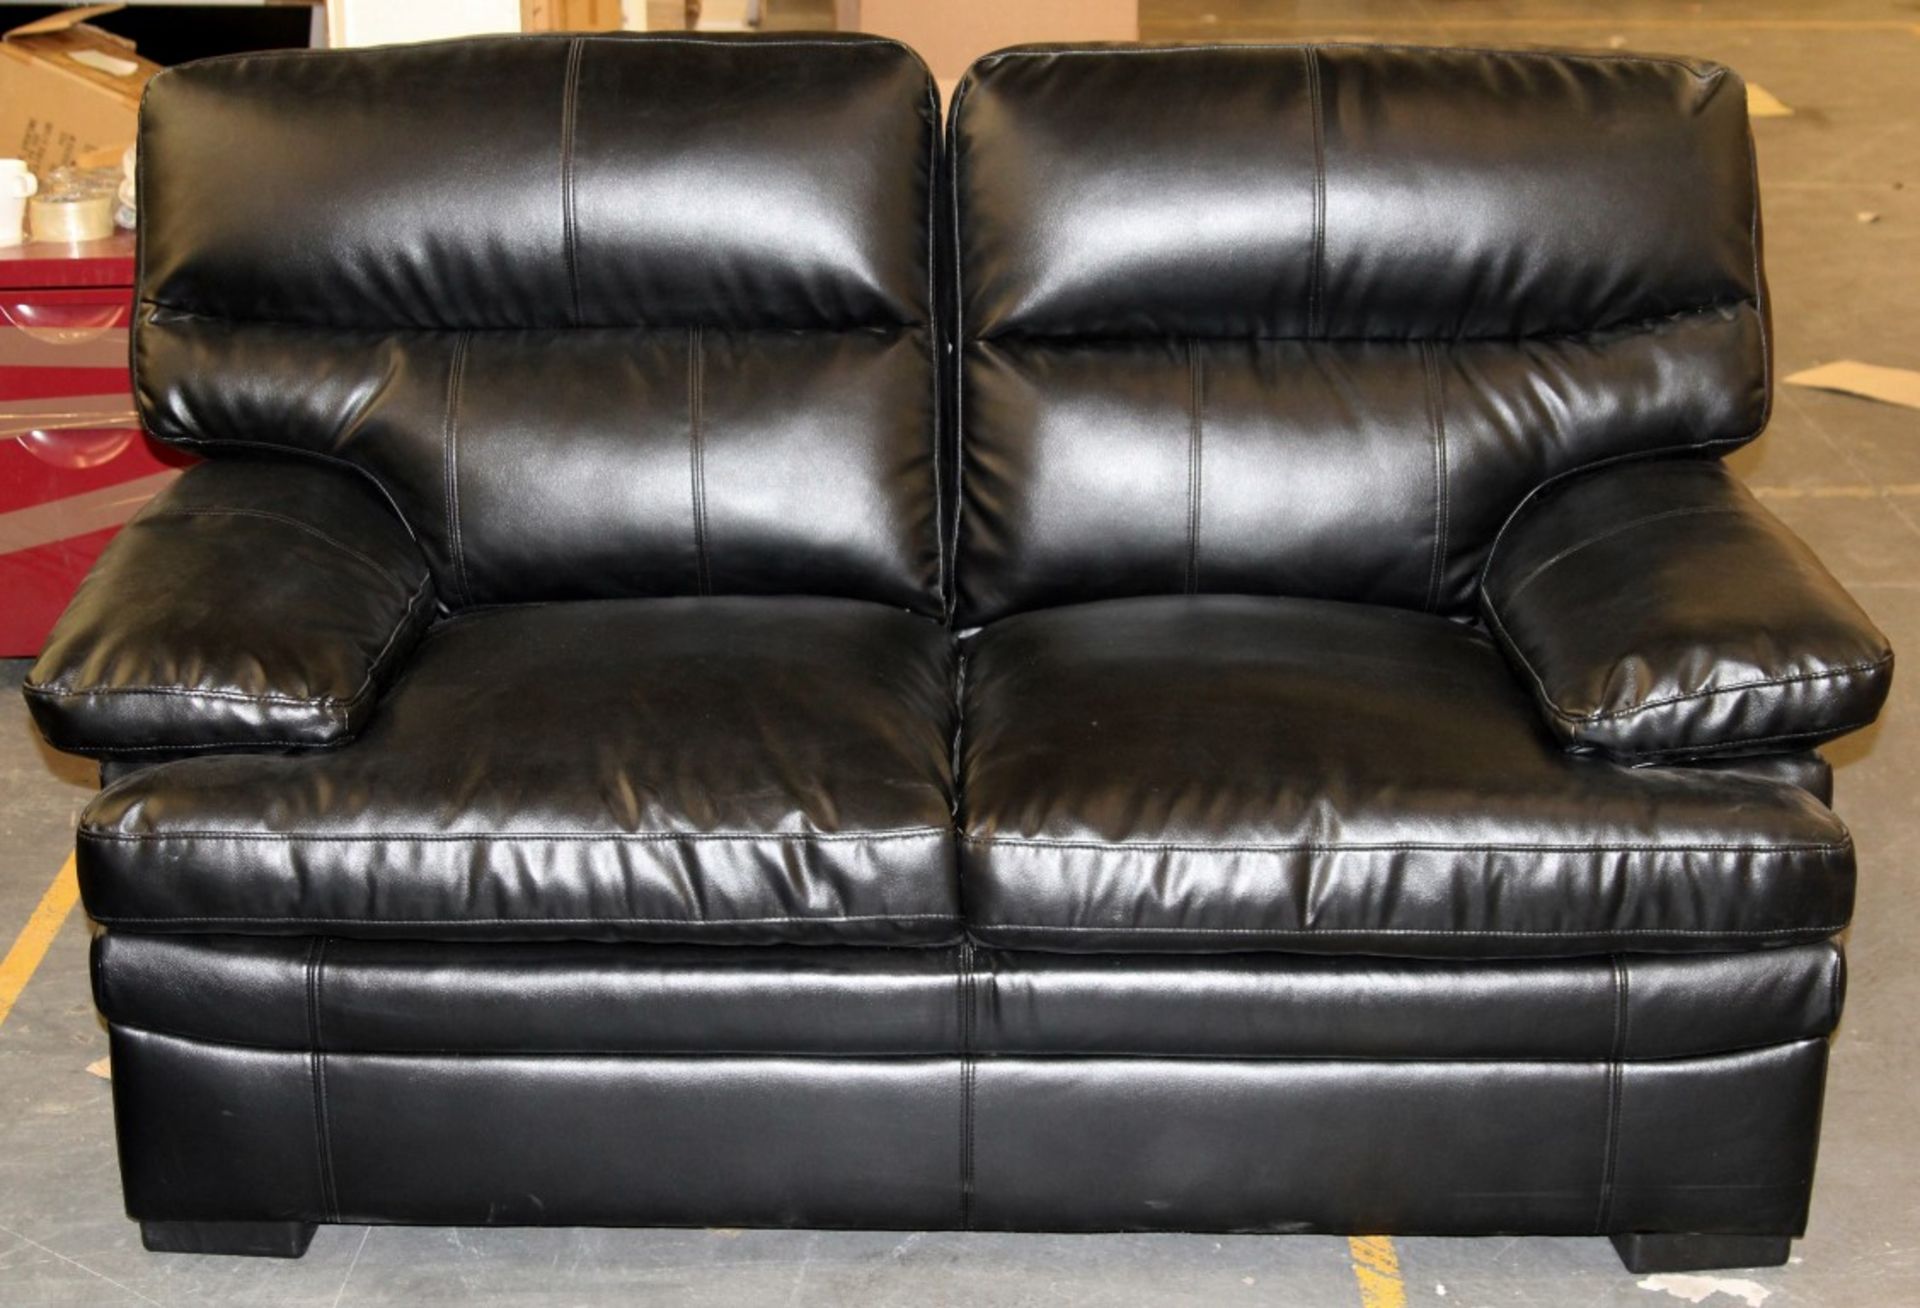 Black 3 + 2 Leather Seater Sofa Set – Both Upholstered In Black Bonded Leather – Ref CH061 – RRP £ - Image 2 of 3